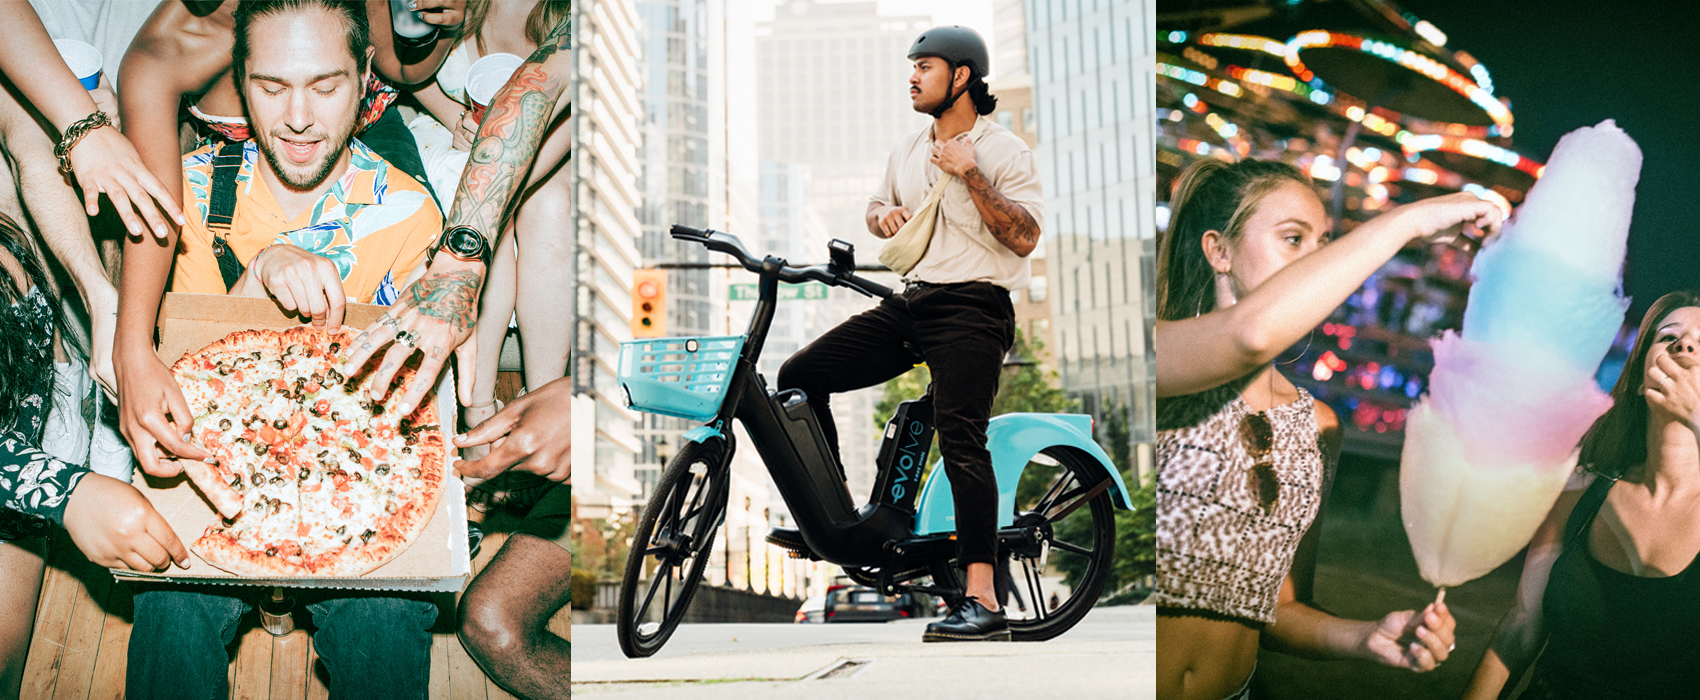 Three images side by side: Man holding pizza while many hands reach in for a slice, a man on an Evolve e-bike, a person at a fair holding a colourful tiered cotton candy.